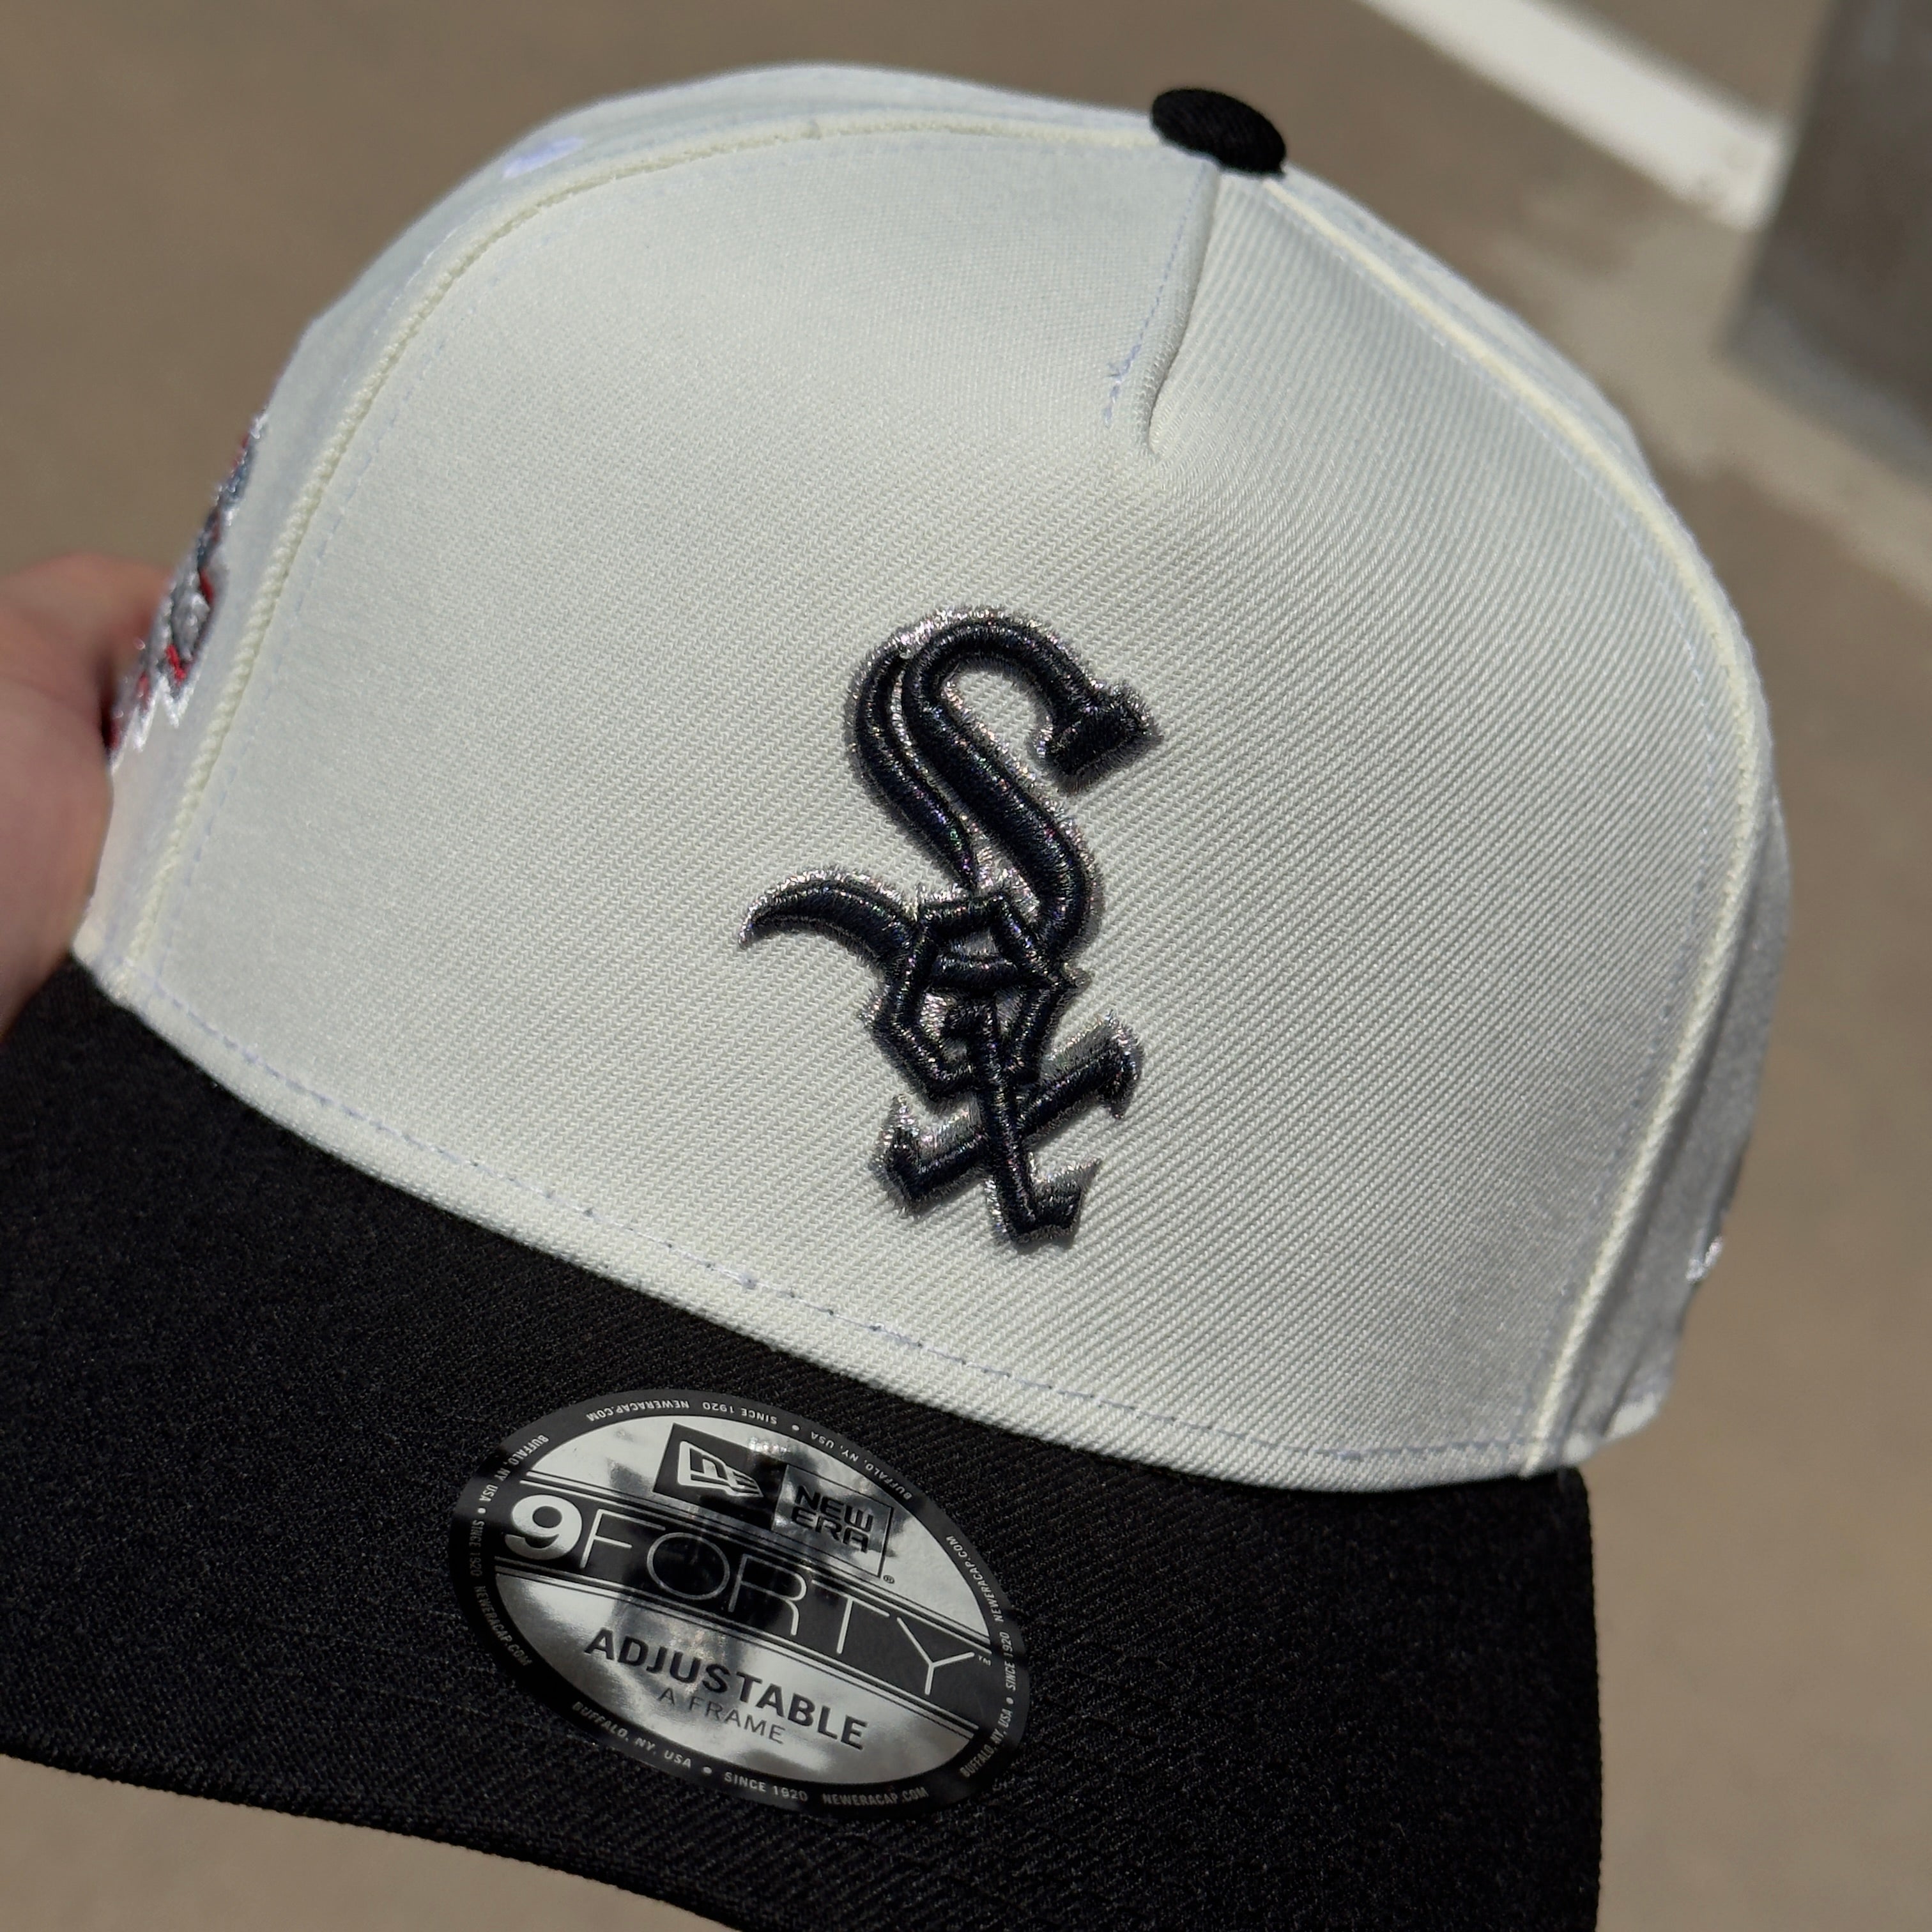 NEW Chrome Chicago White Sox All Star Game 2003 New Era 9Fifty Adjustable One Size A-Frame